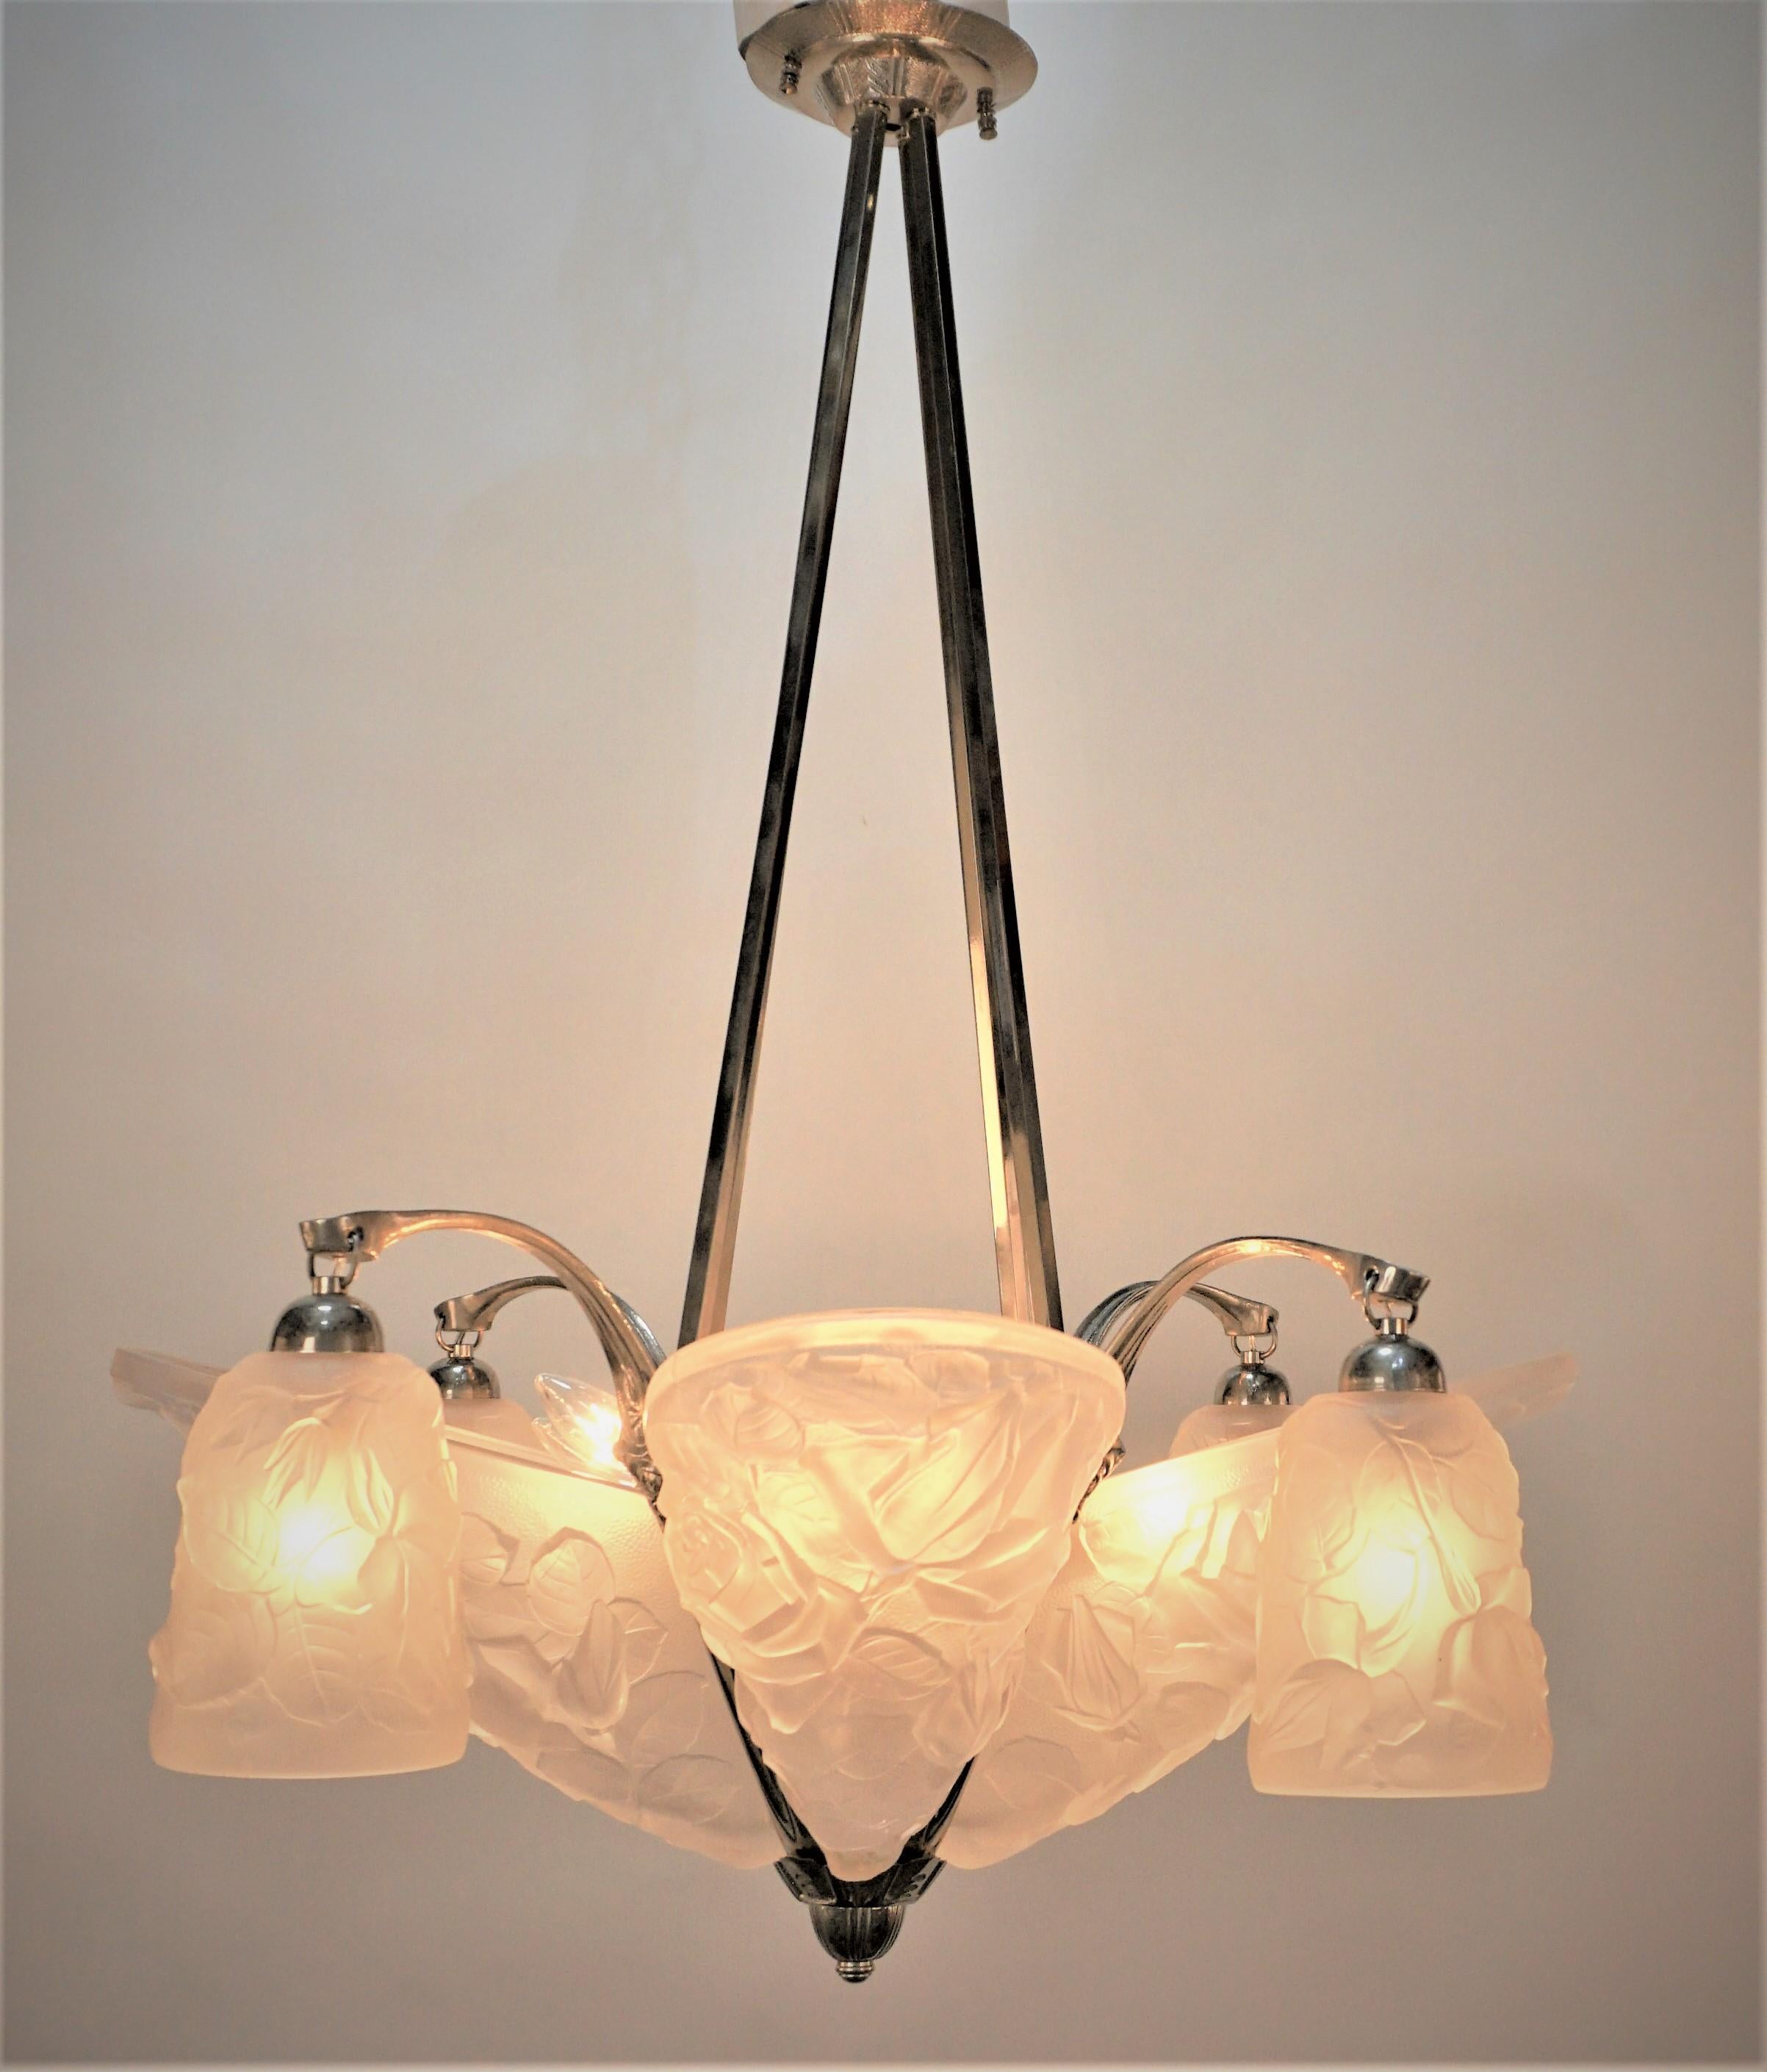 A fantastic French art deco chandelier with clear frosted molded glass shades with floral motif polished nickel on bronze frame.
Total of twelve lights 60 watts each.
